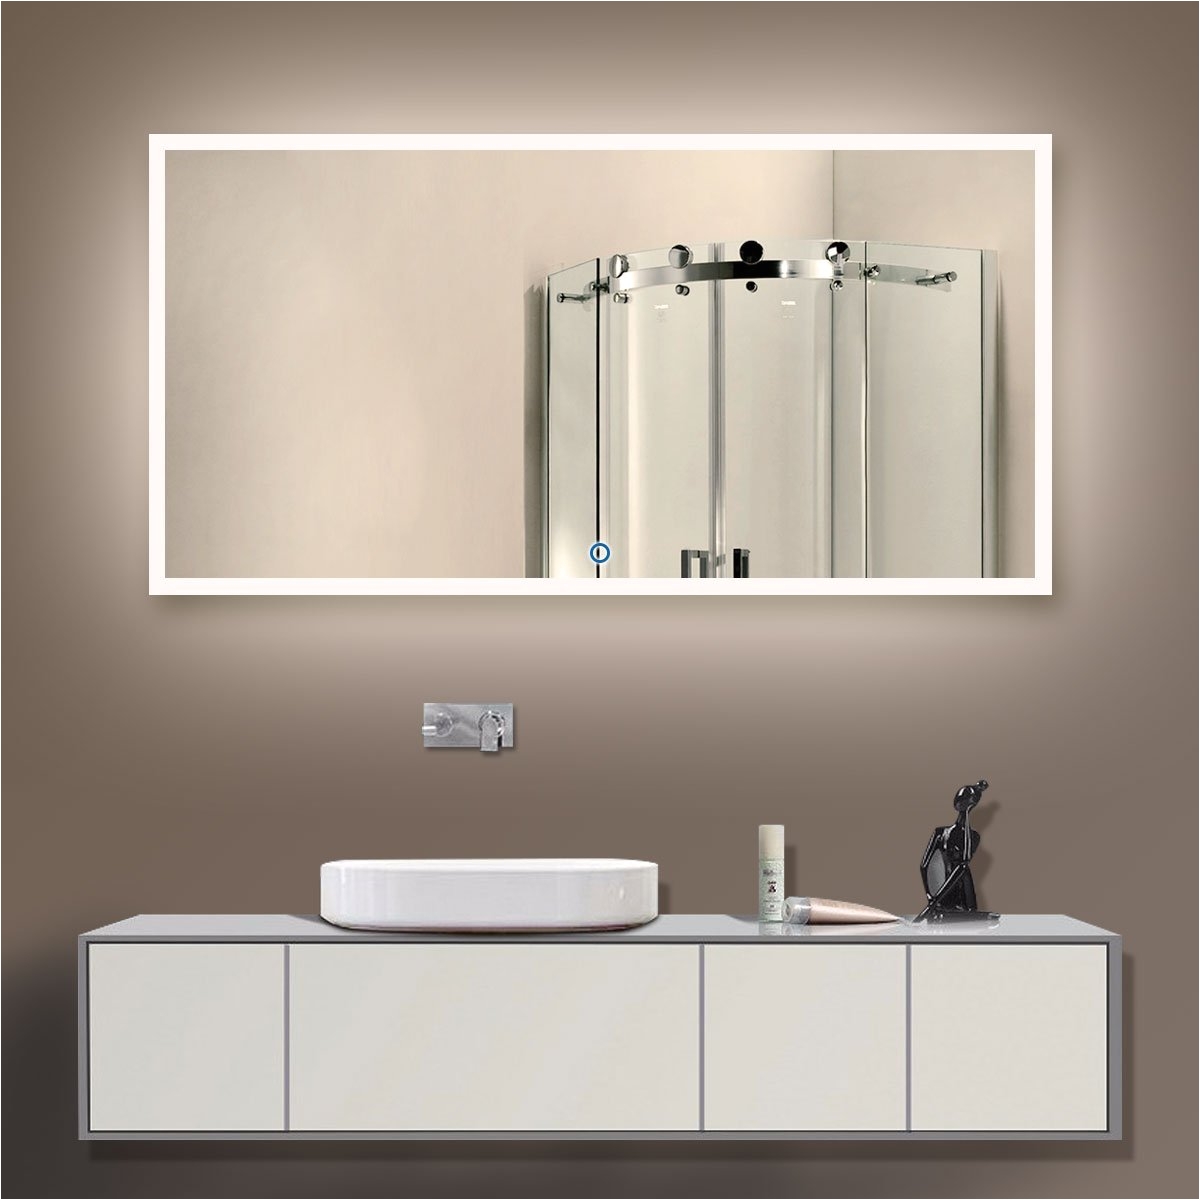 amazon com 5628 in led decorative bathroom silvered mirror touch button d n031 d home kitchen